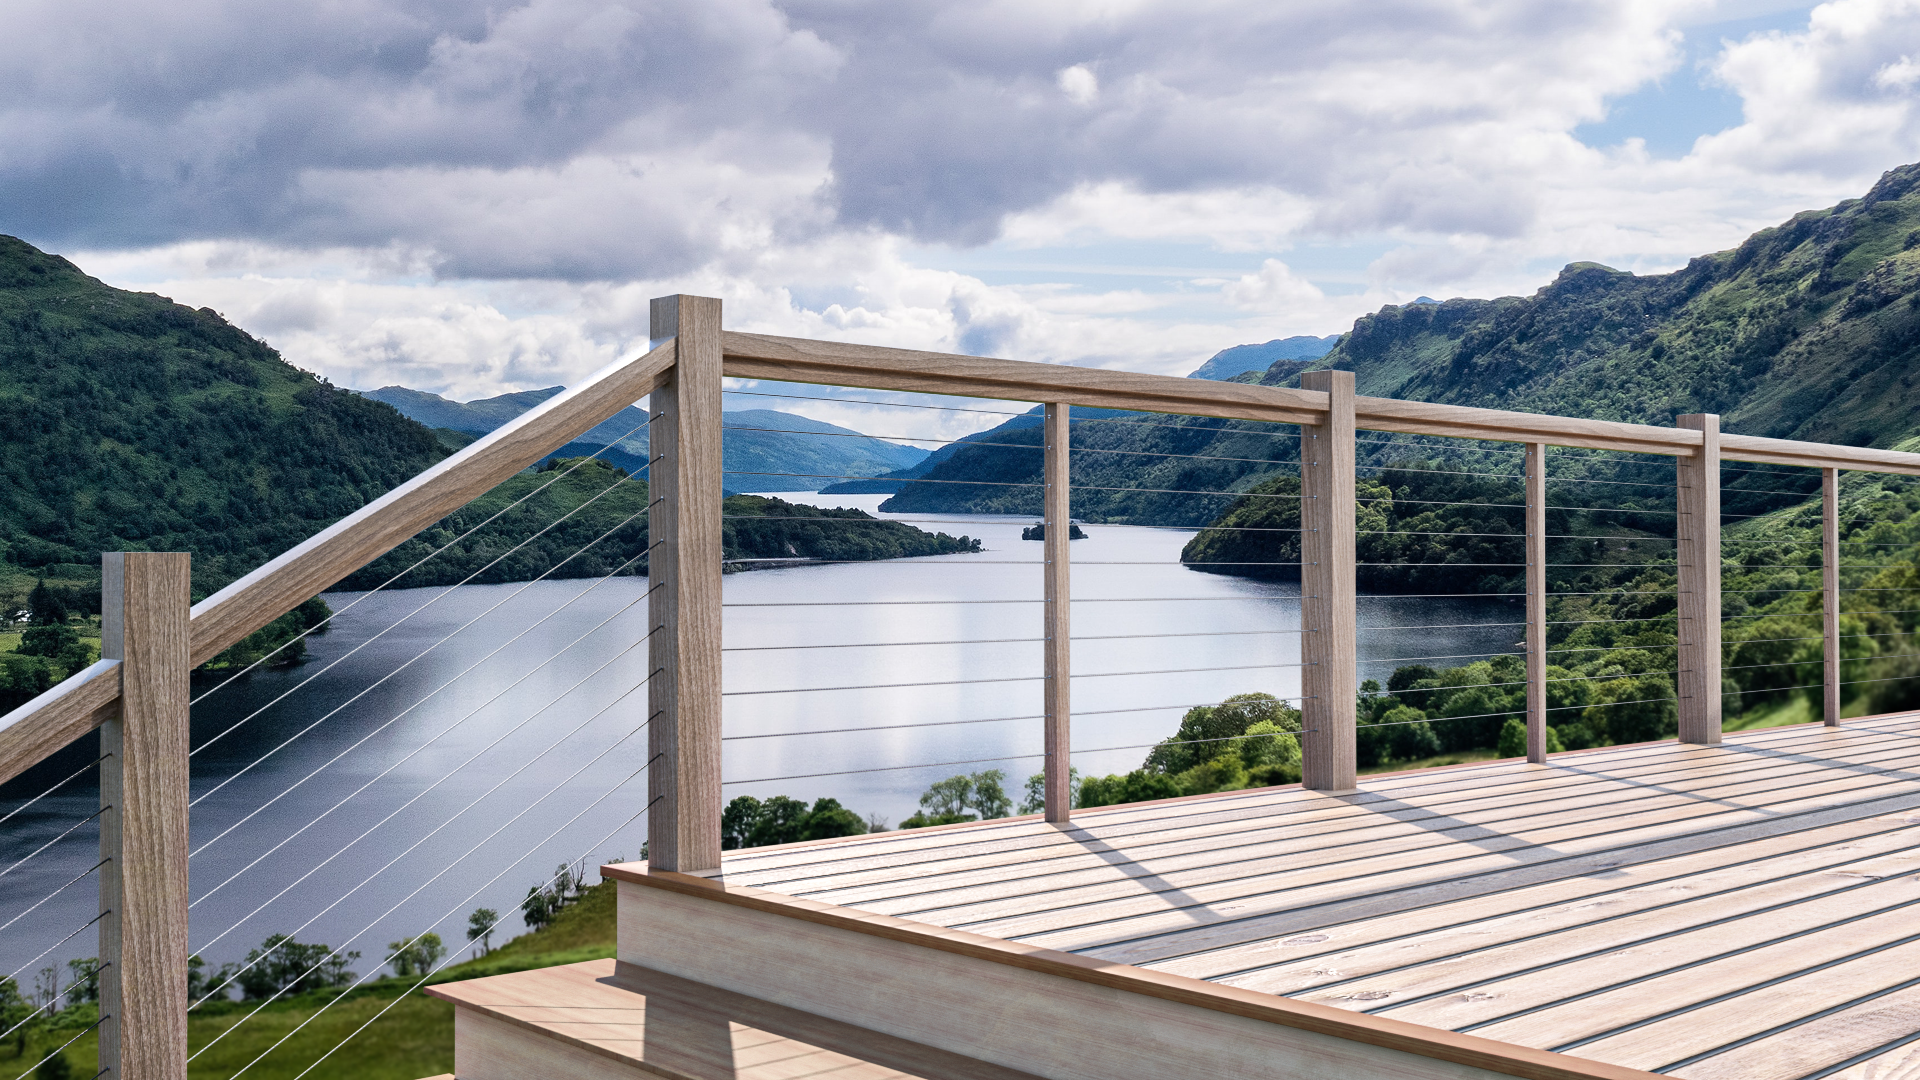 Muzata's cable railing system offers unobstructed scenic views